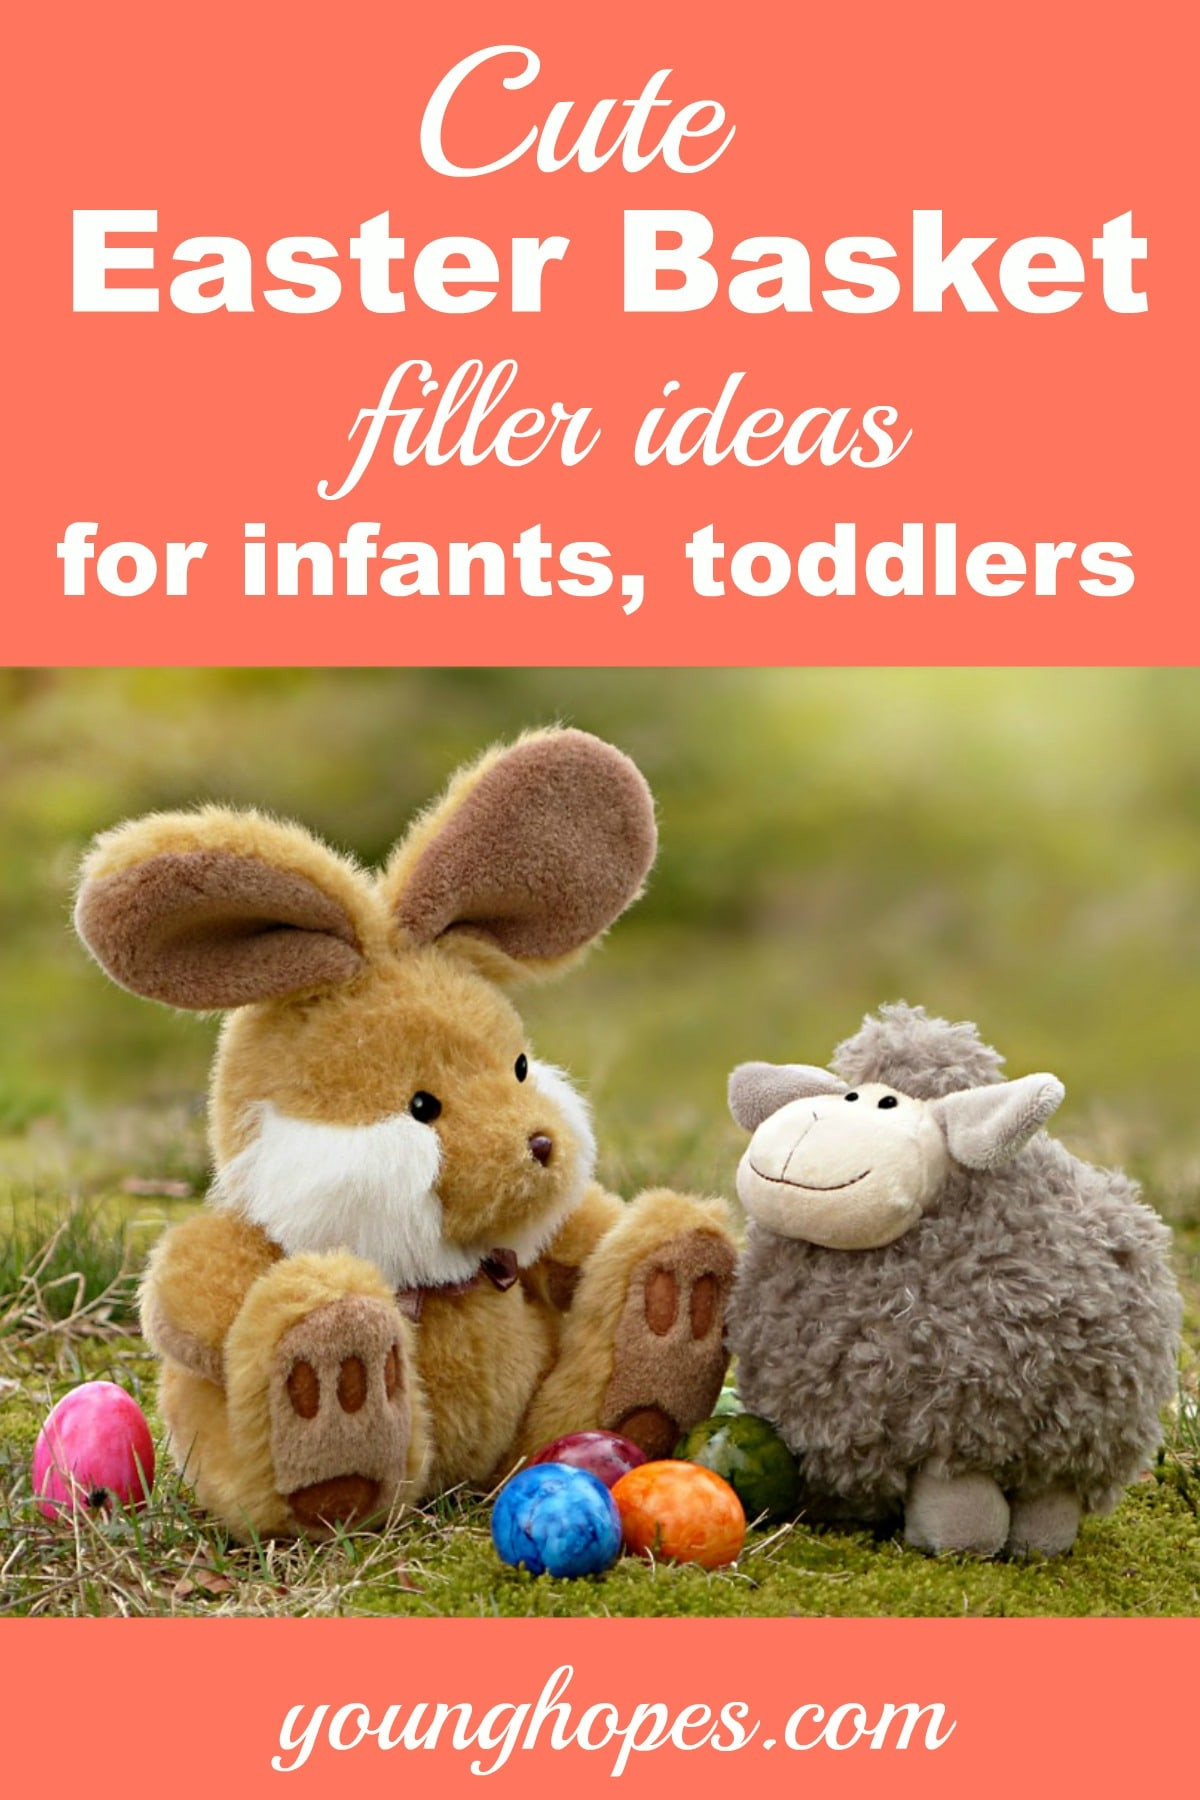 Cute Easter Picture Ideas
 Cute Easter Basket Filler Ideas for Infants and Toddlers